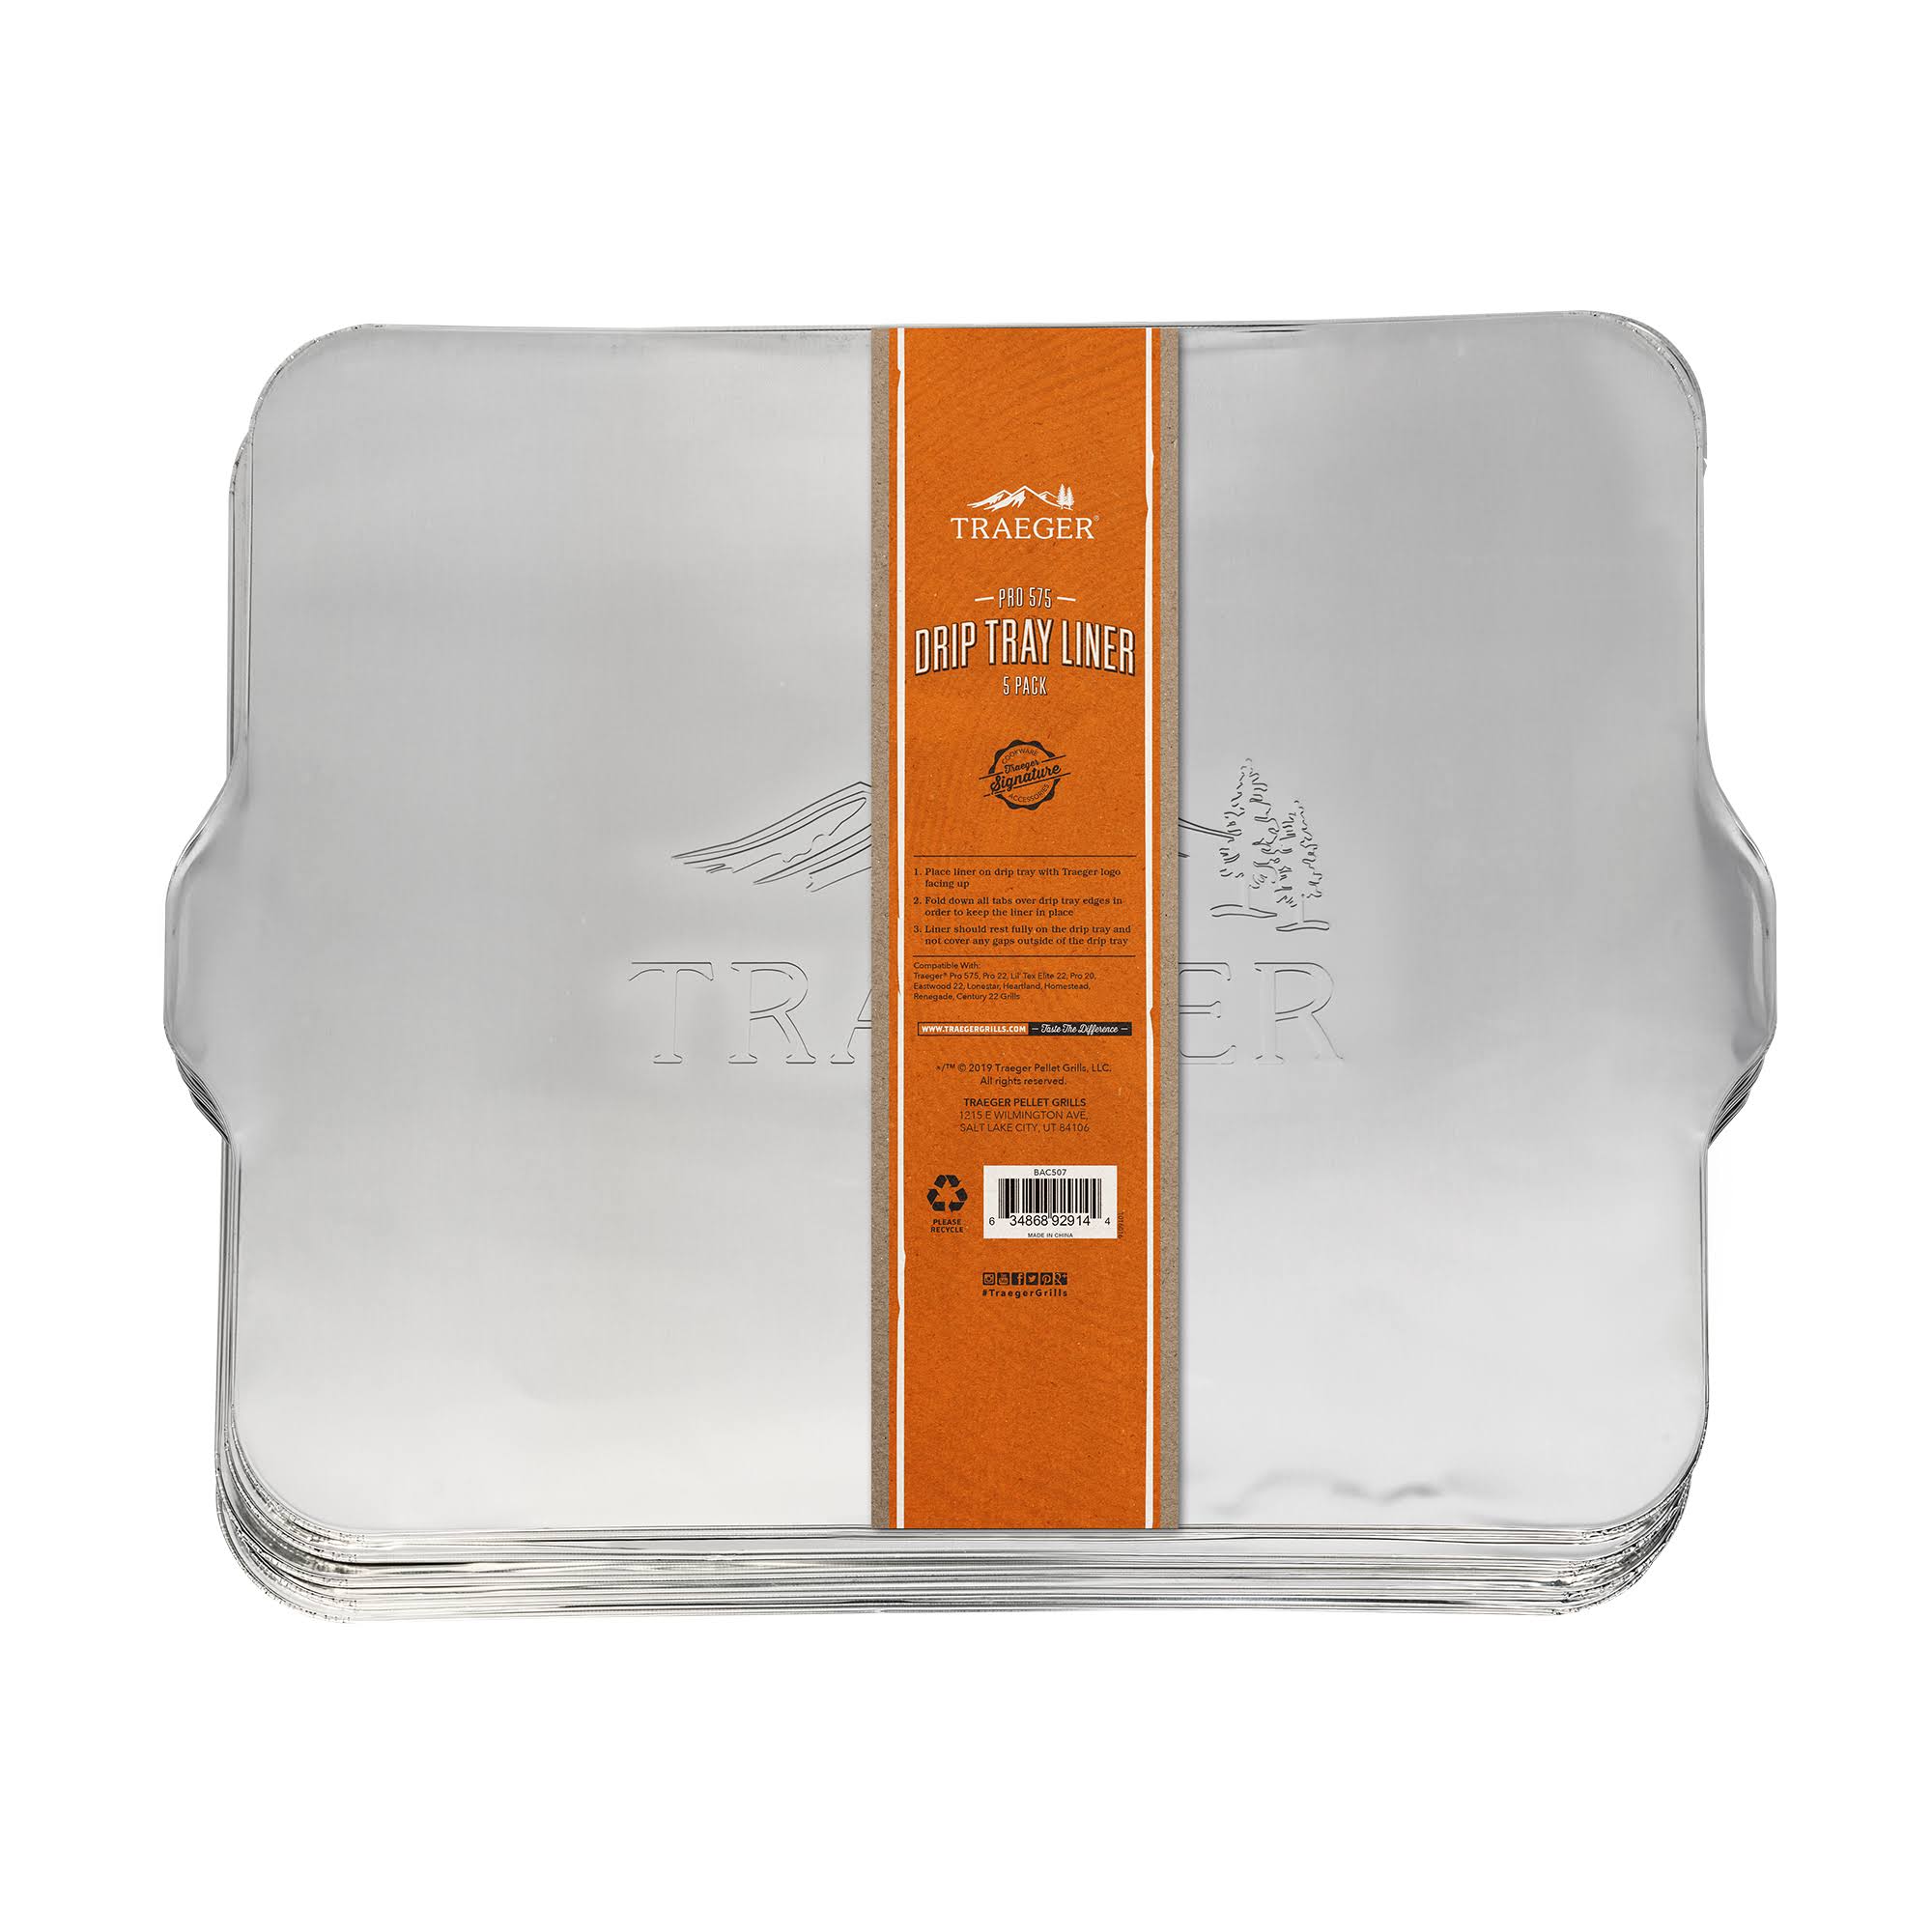 Traeger Drip Tray Liner - 5 Pack - Pro 575